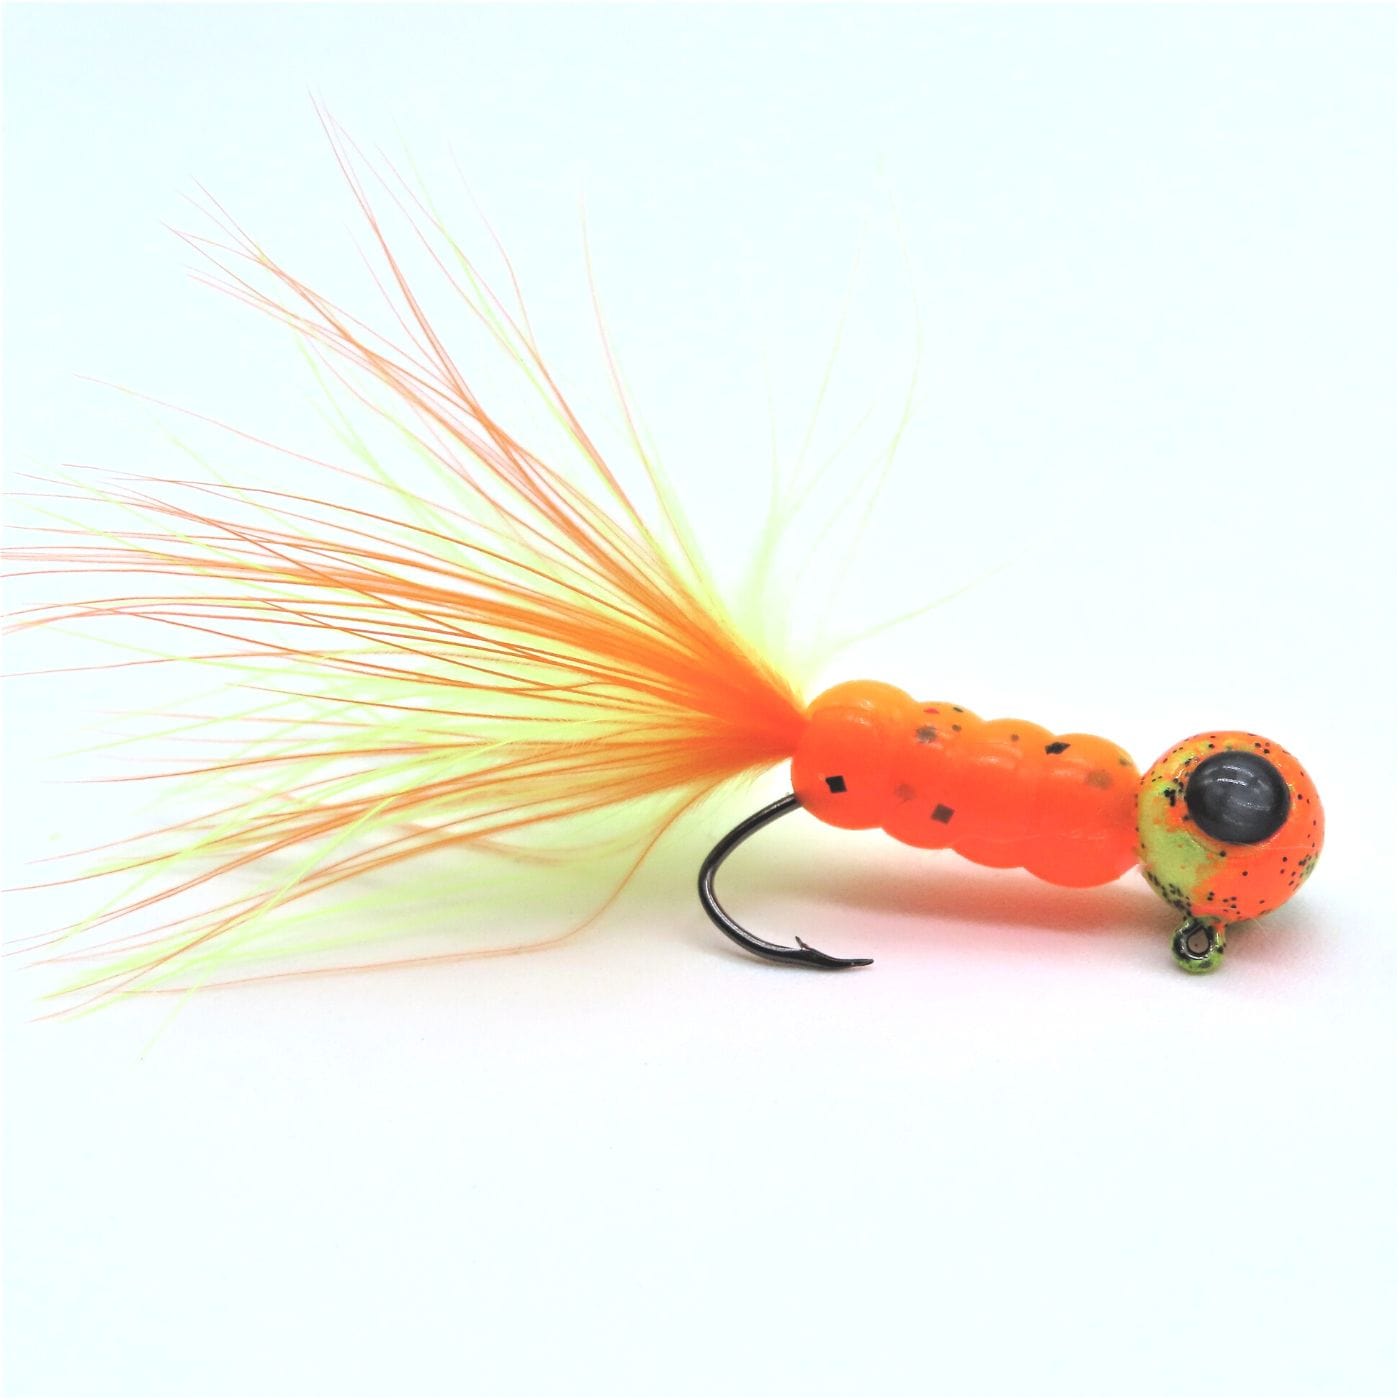 Hand tied Crappie jig, jelly belly jig with a cajun cricket soft plastic body and a 2 tone yellow/orange marabou tail. Head is custom painted with yellow/orange Pro tec powder paint with black 3D eyes. Hand tied on a mustad sickle hook by Ramble tamble tackle.